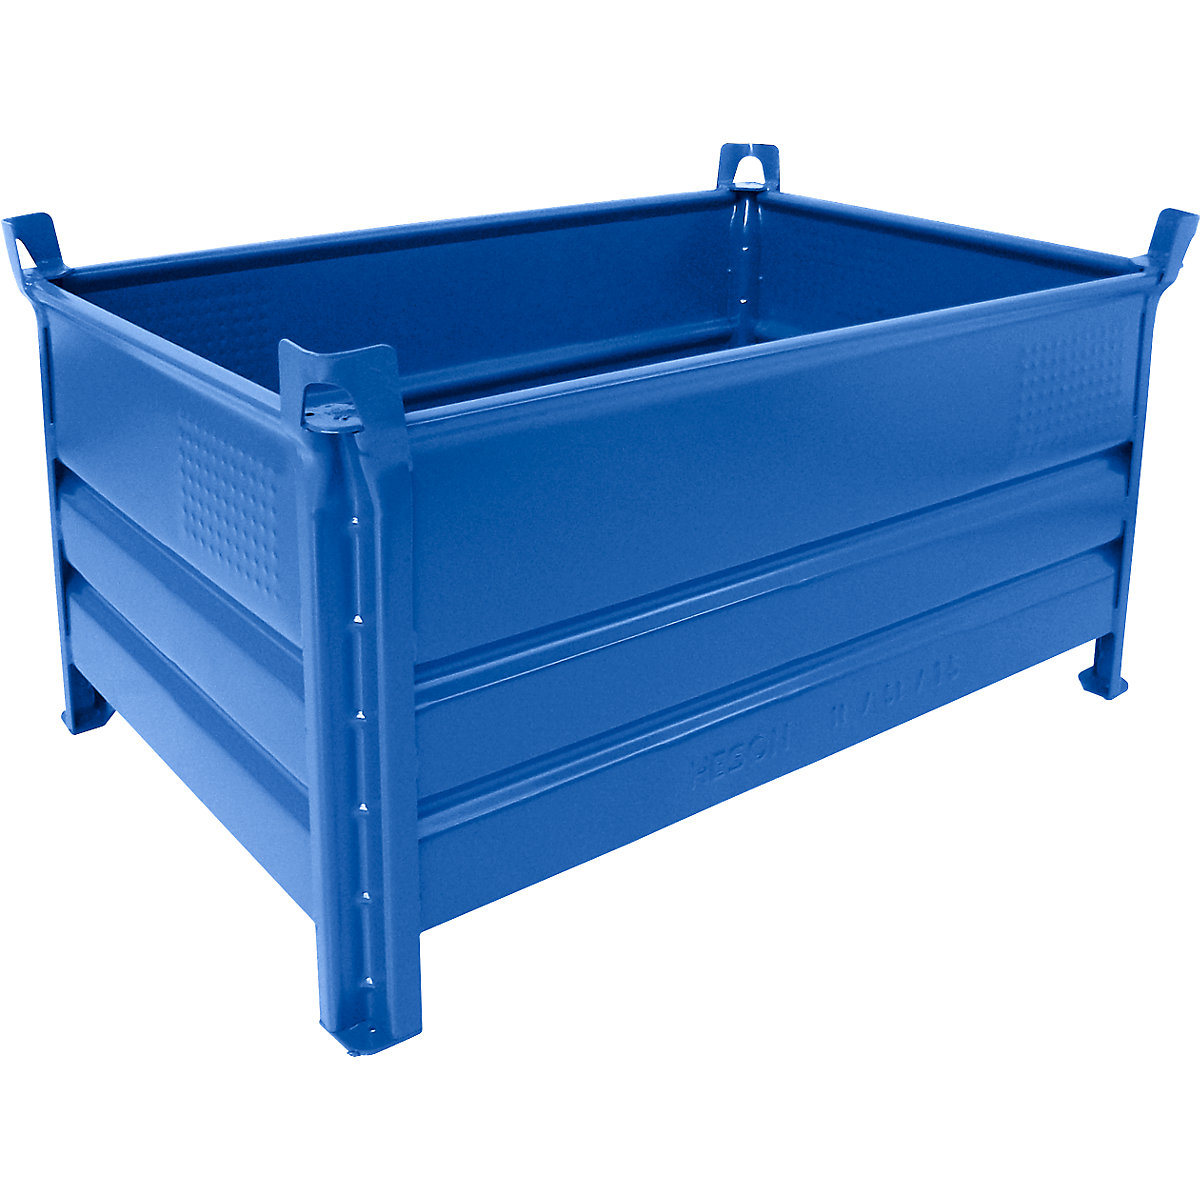 Solid panel box pallet – Heson, WxL 800 x 1200 mm, max. load 2000 kg, blue, 1+ items-6